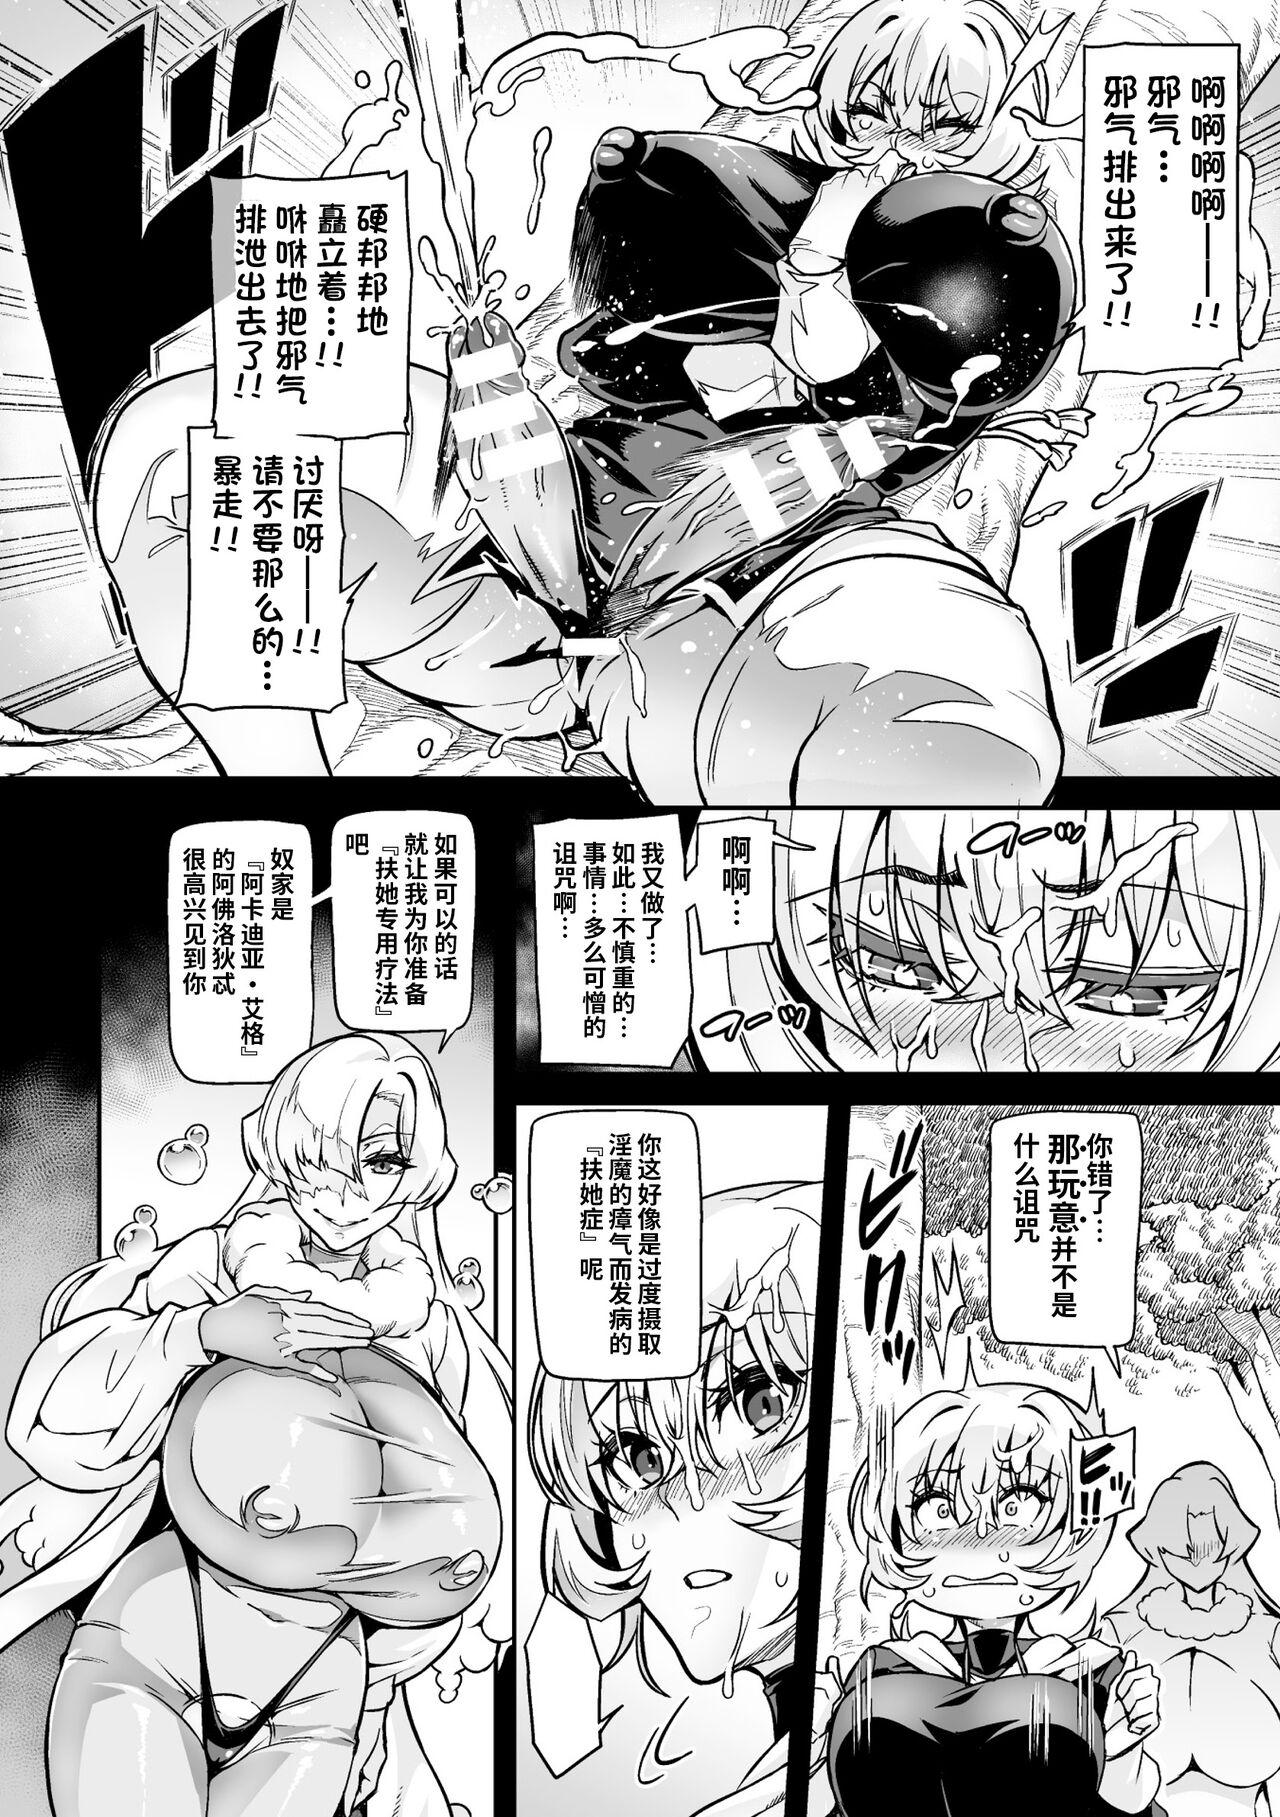 Face Sitting Youkoso! Inma Shoukan Arcadia Ego Ch. 2 Scene - Page 9